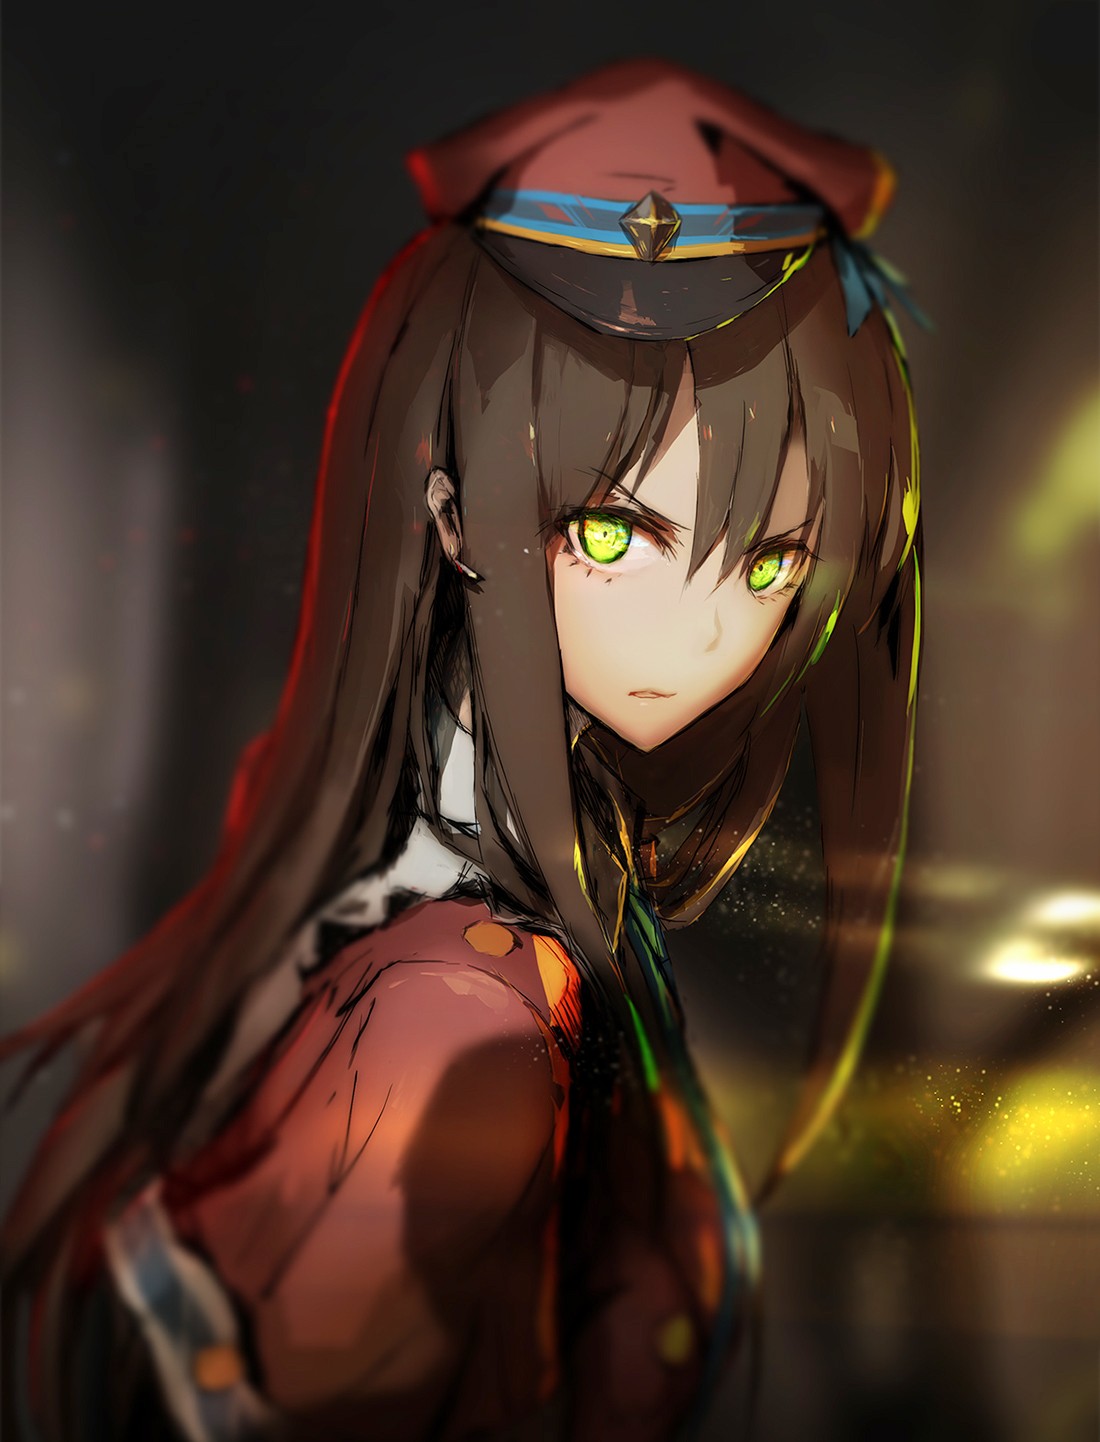 Anime 1100x1442 THE iDOLM@STER: Cinderella Girls Shibuya Rin long hair green eyes hat earring angry anime girls anime THE iDOLM@STER Lowlight Kirilenko face women with hats